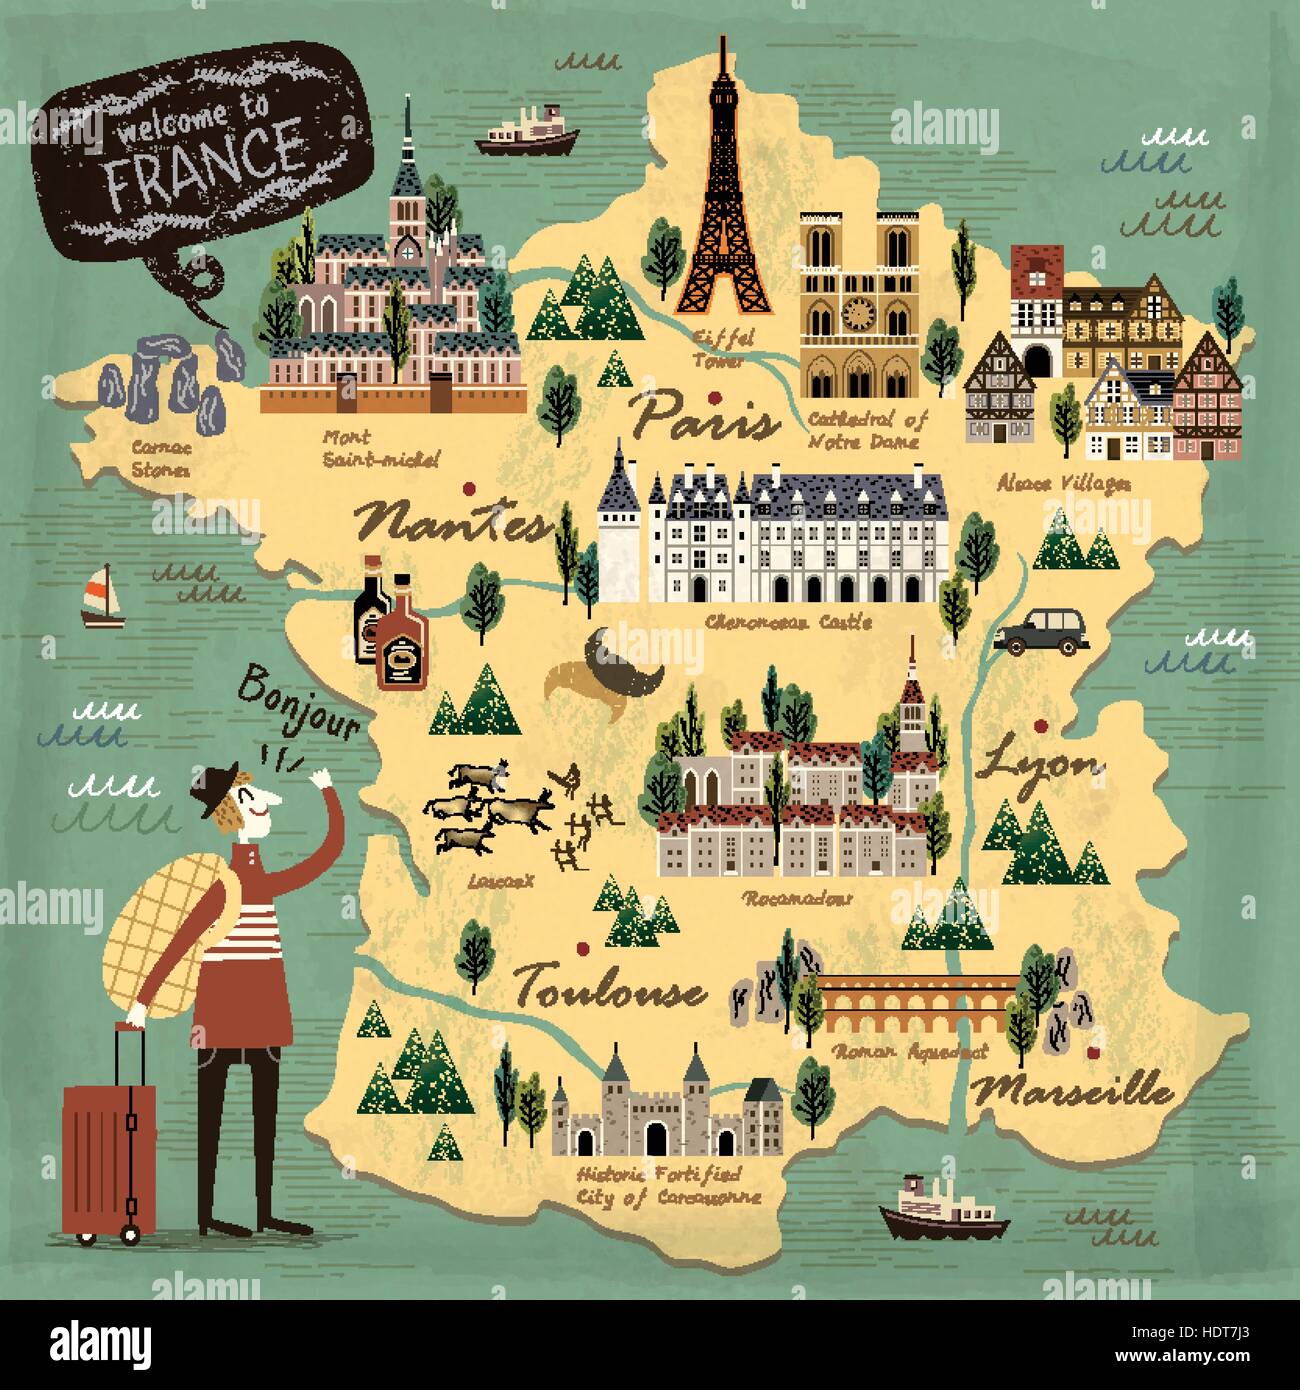 France travel concept illustration map with attractions Stock Vector